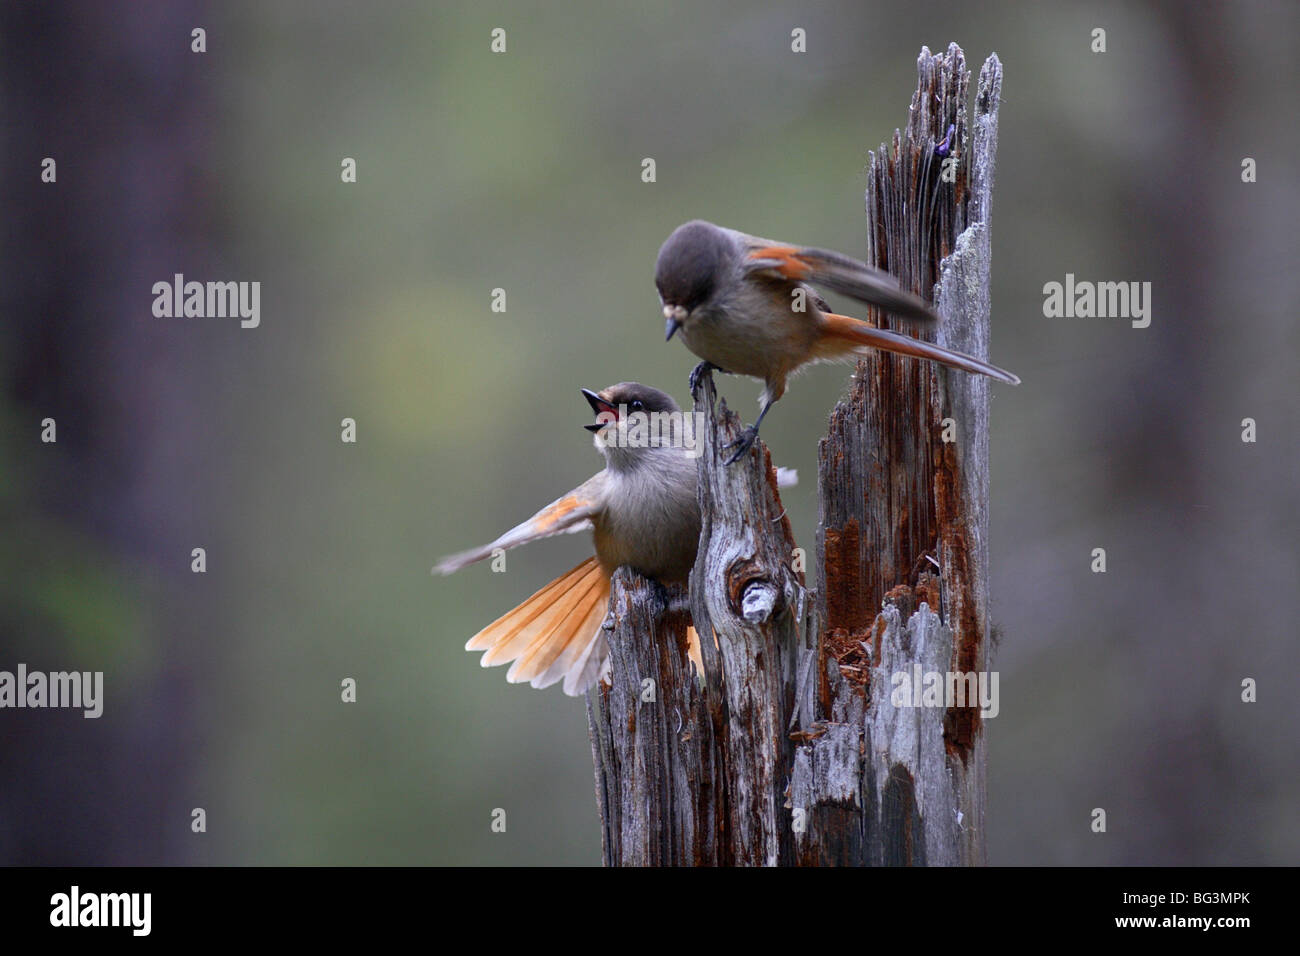 siberian jay sitting in old forest environnement i typical of boreal climate Stock Photo